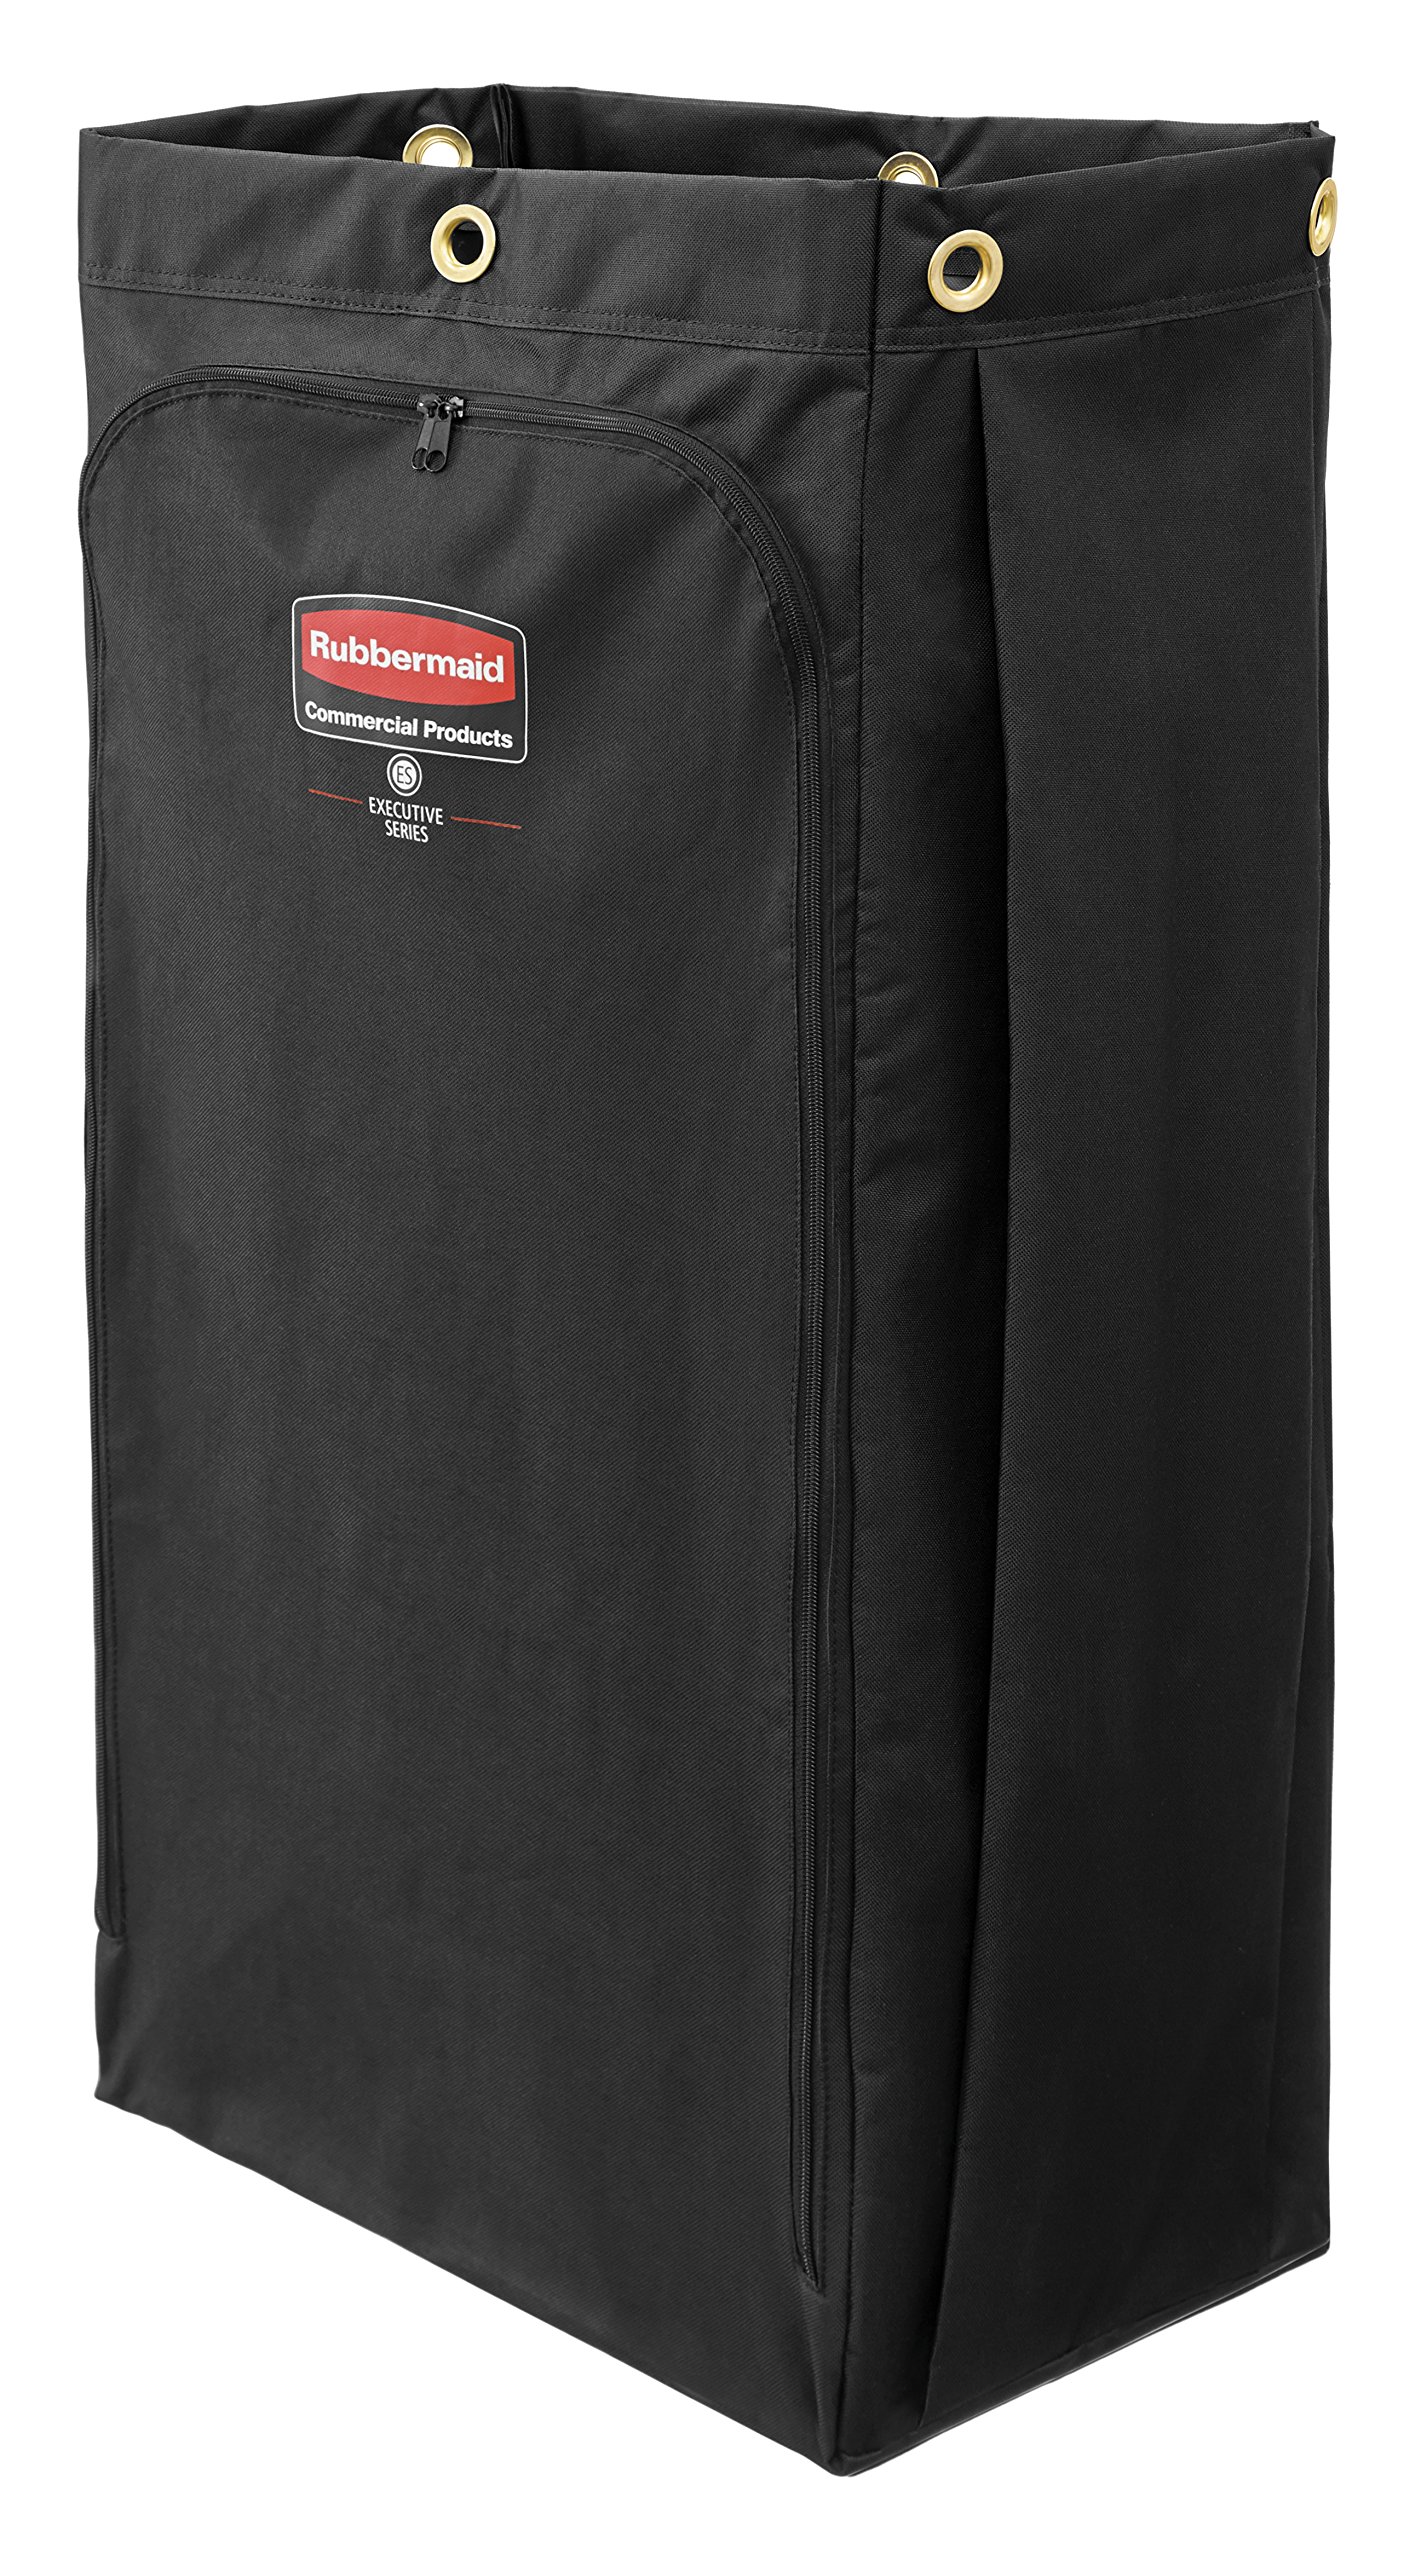 Rubbermaid Commercial Products Cleaning Cart Bag & Commercial Products Executive HYGEN Mop Quick-Connect Frame for Wet/Dry Microfiber Mopping, Fits 18in Mop Pads, Silver/Black, Handle not Included